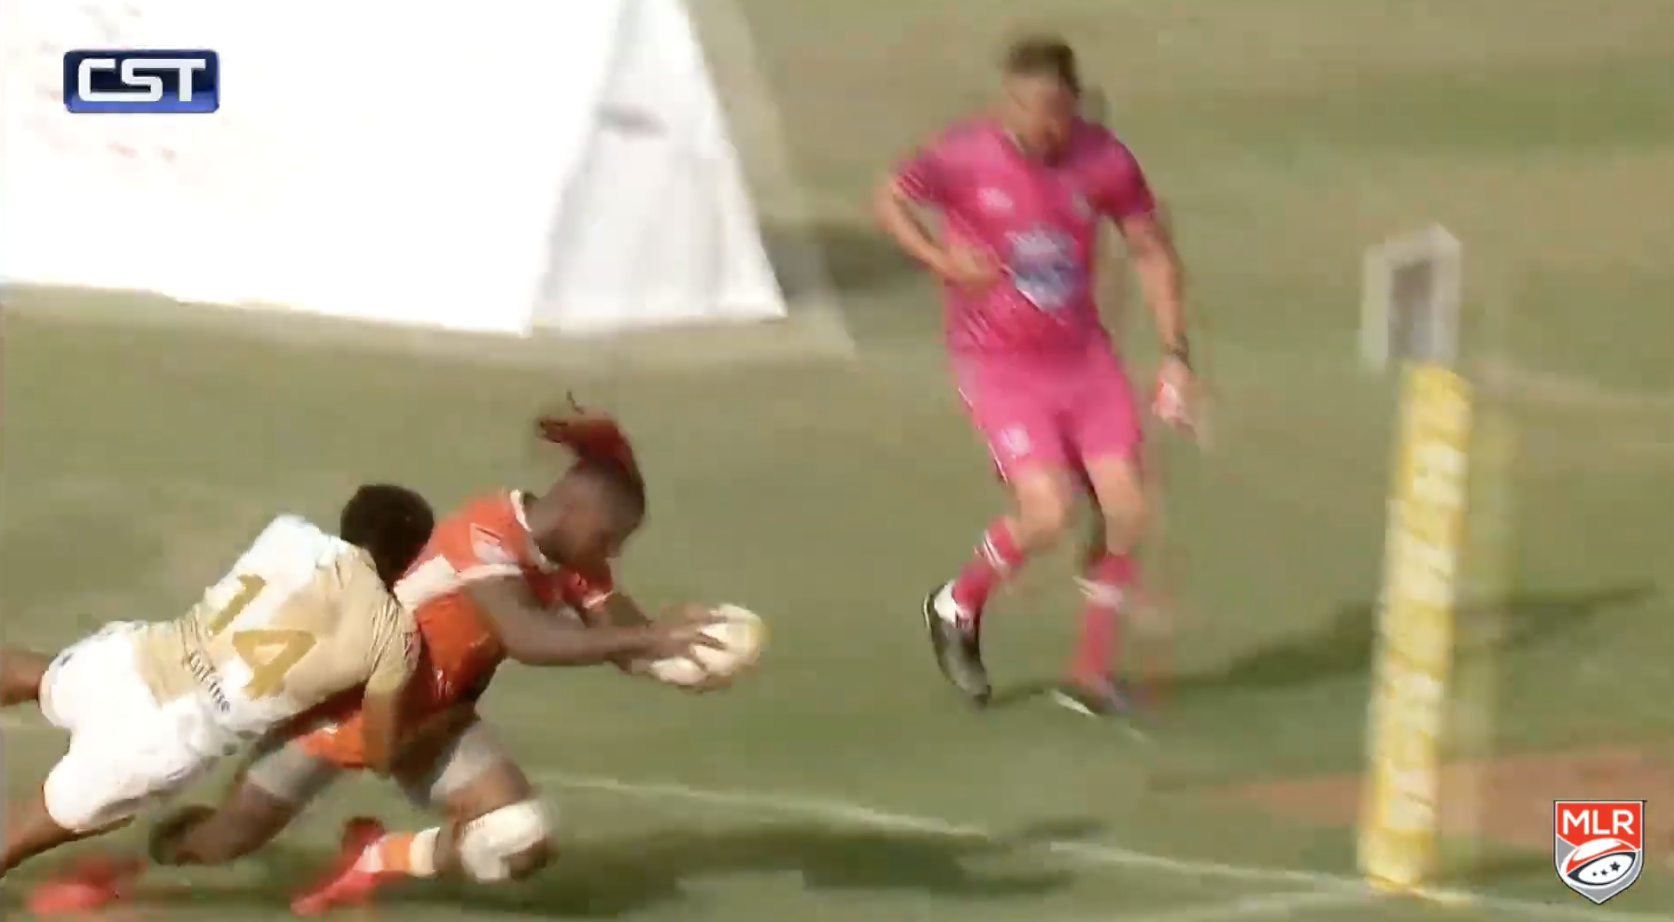 Rodrick Waters Wins Match With This Try!